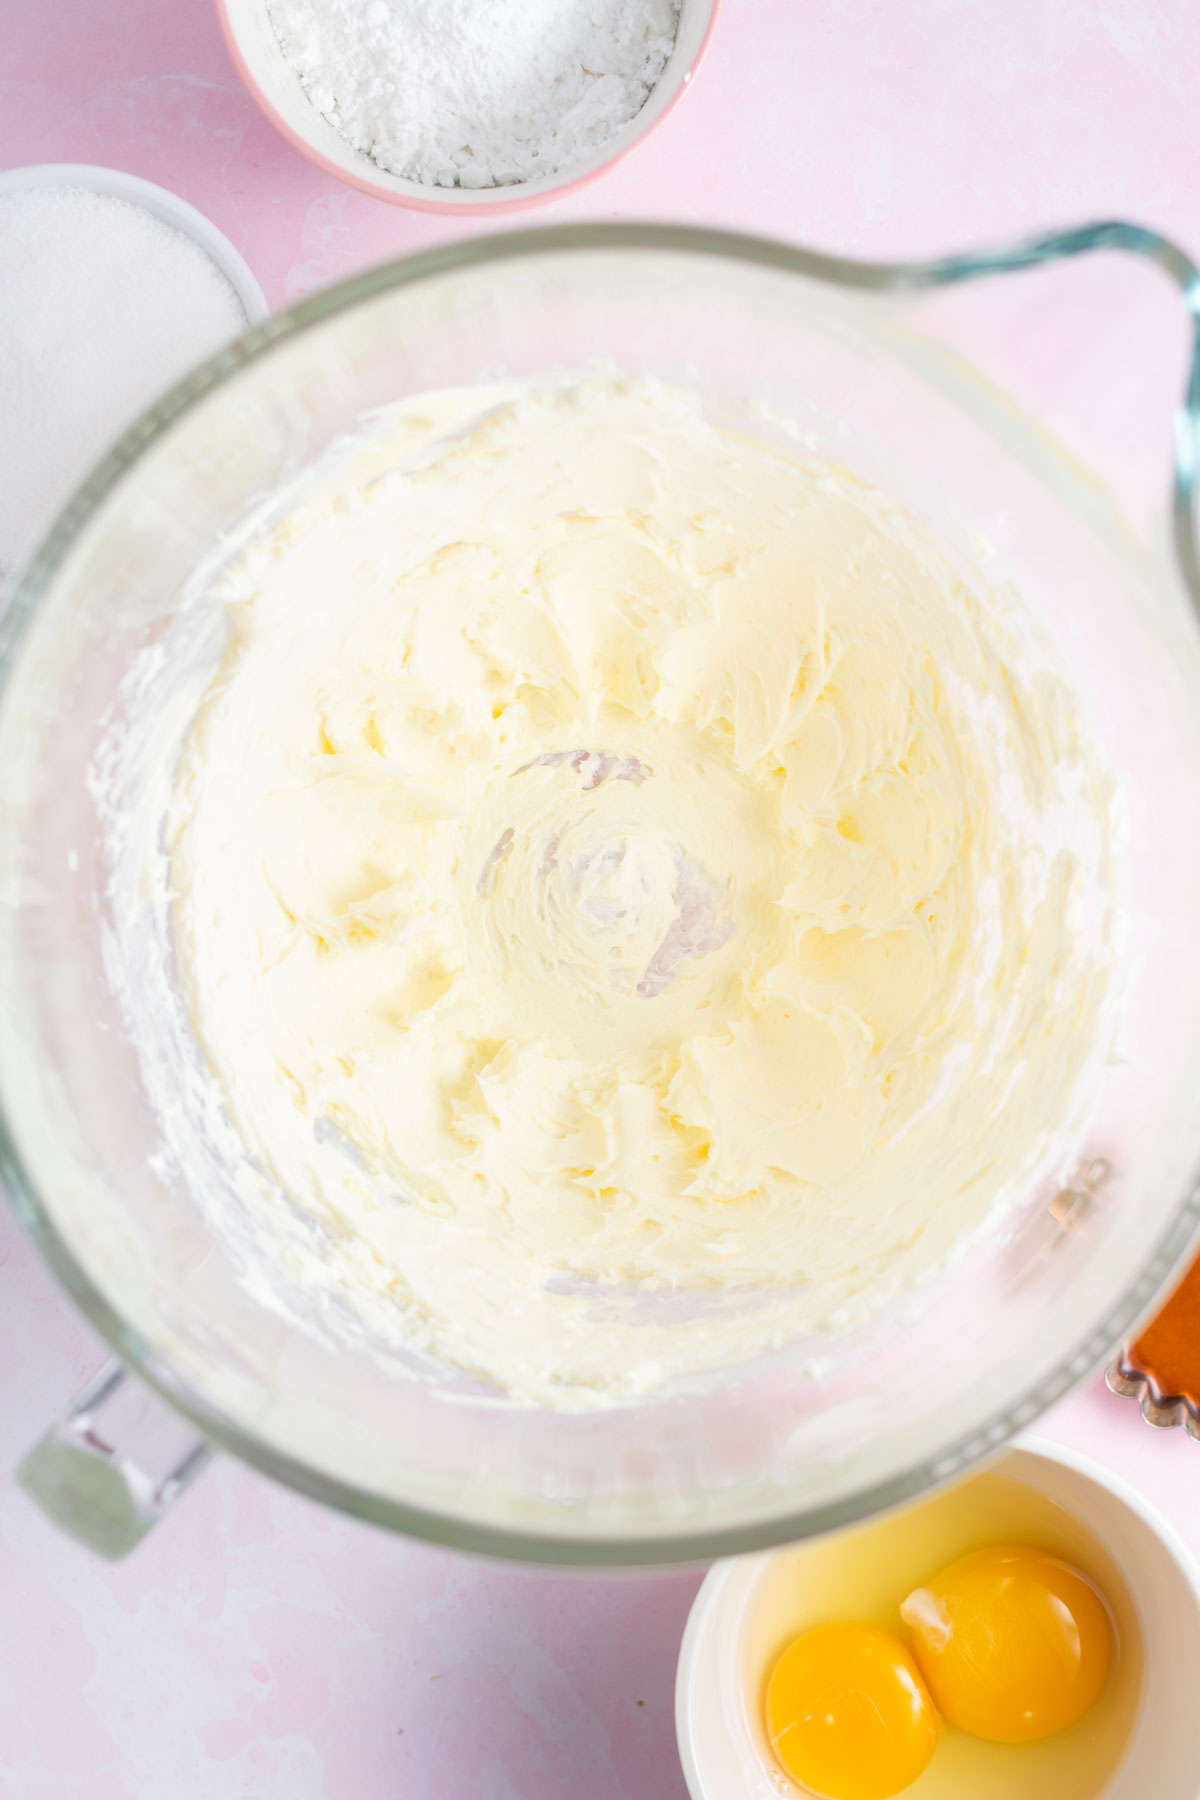 butter and cream cheese beat together in a mixing bowl